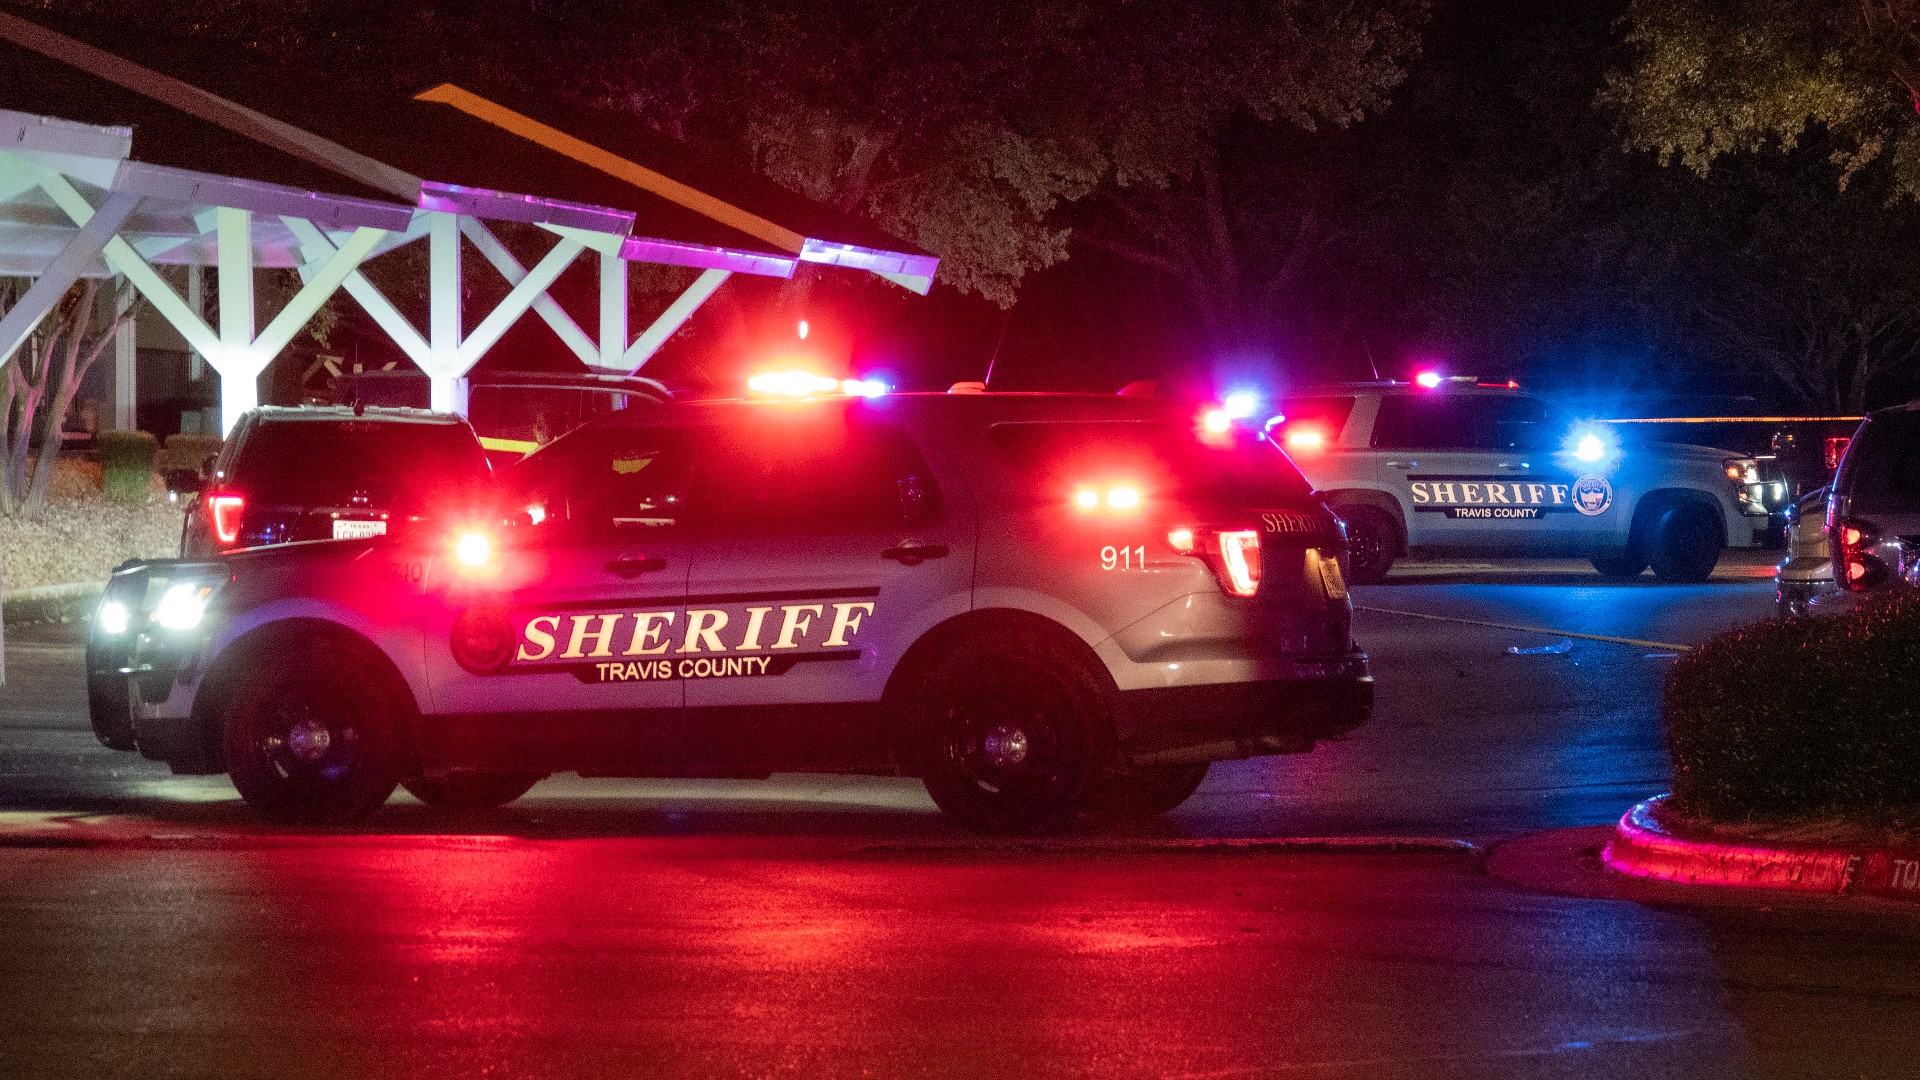 The Travis County Sheriff's Office said one person was rushed to the hospital after they were shot on Shoreline DrIve early Tuesday morning.